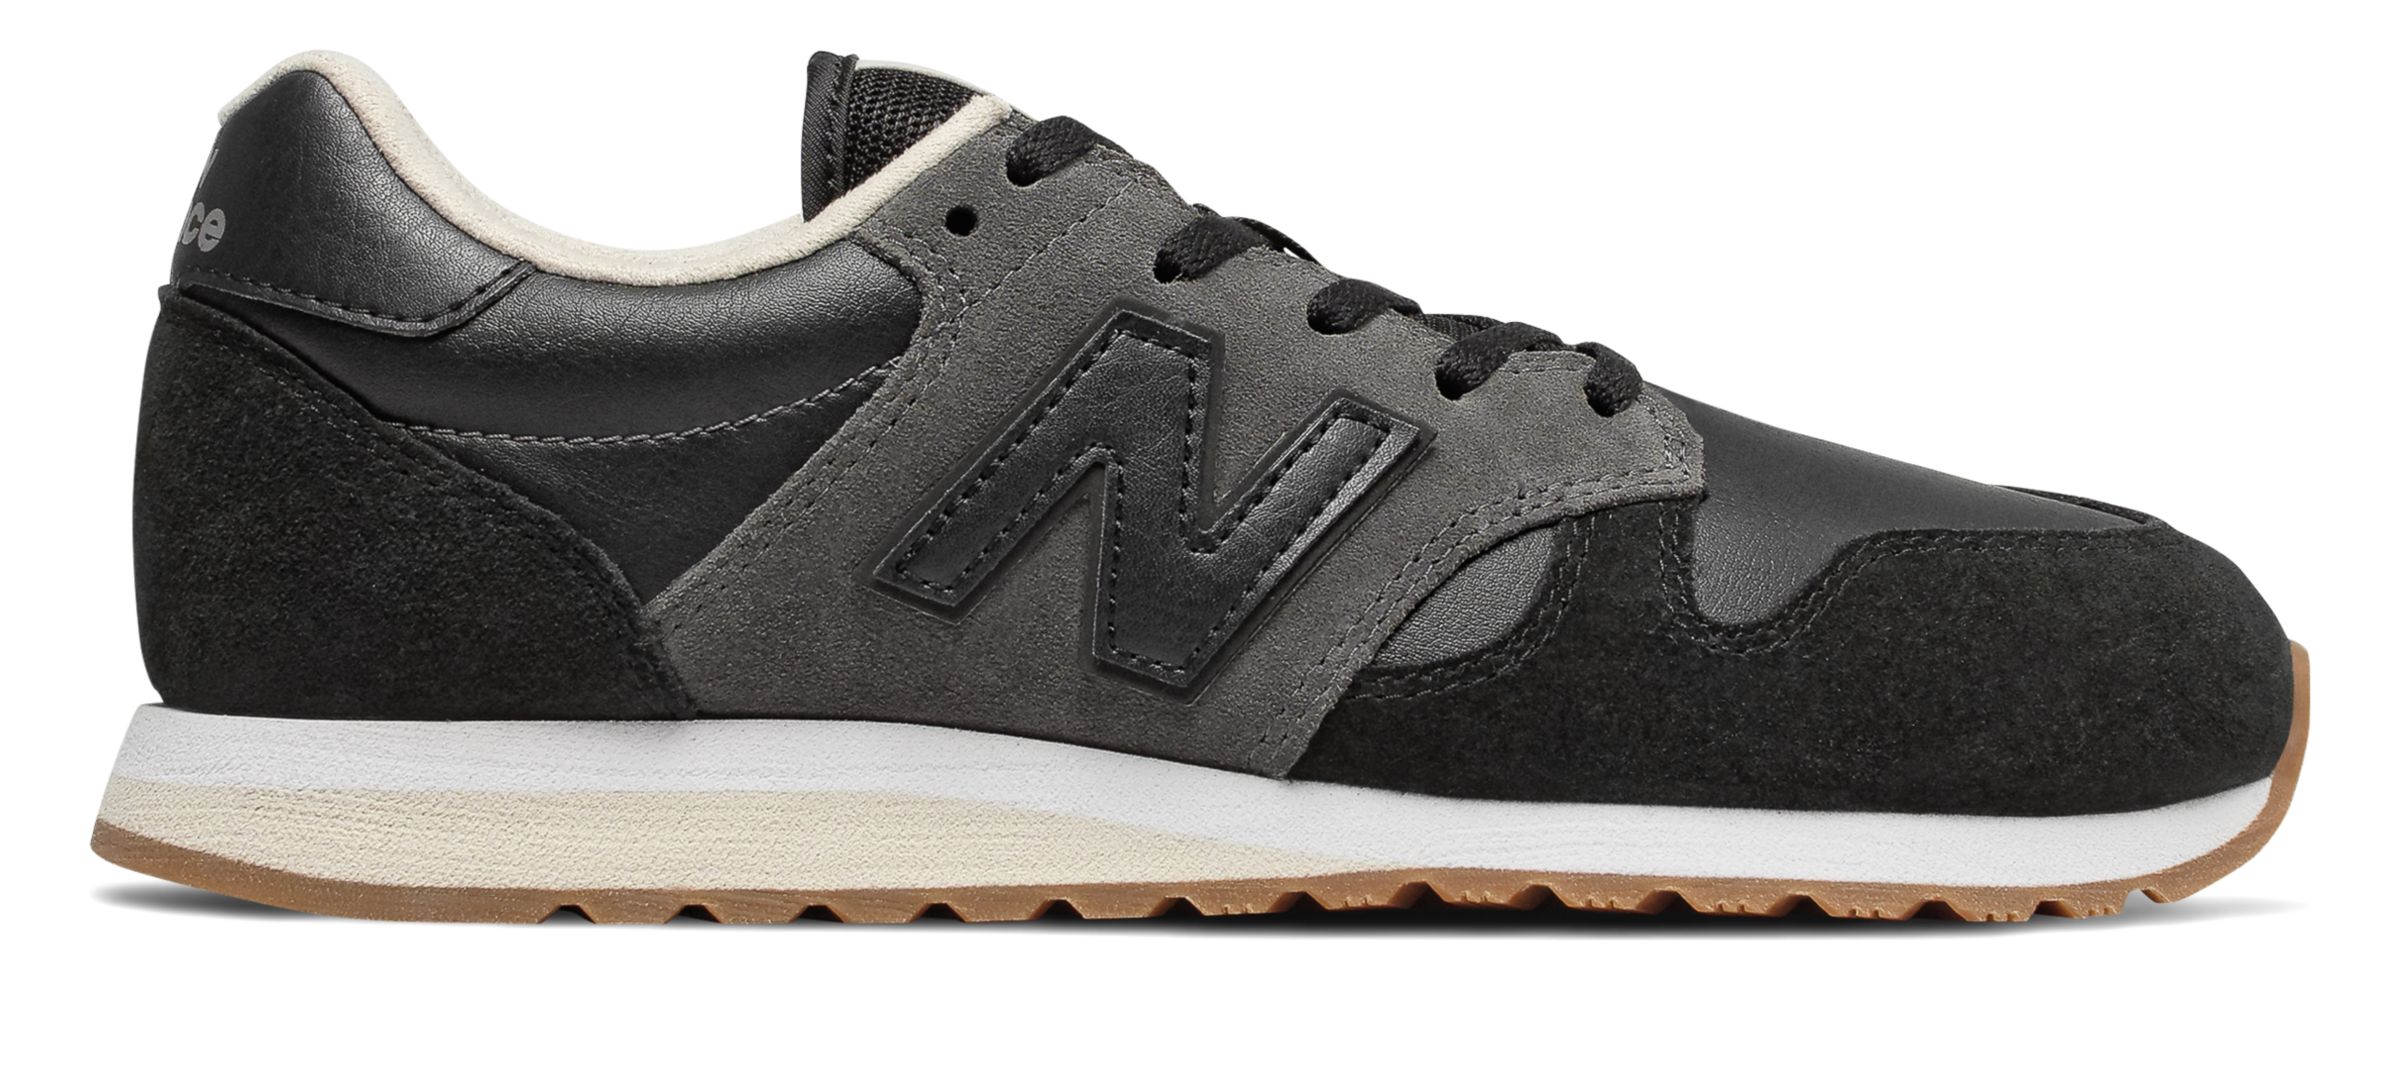 New Balance WL520-SM on Sale - Discounts Up to 66% Off on WL520FB at Joe's New  Balance Outlet